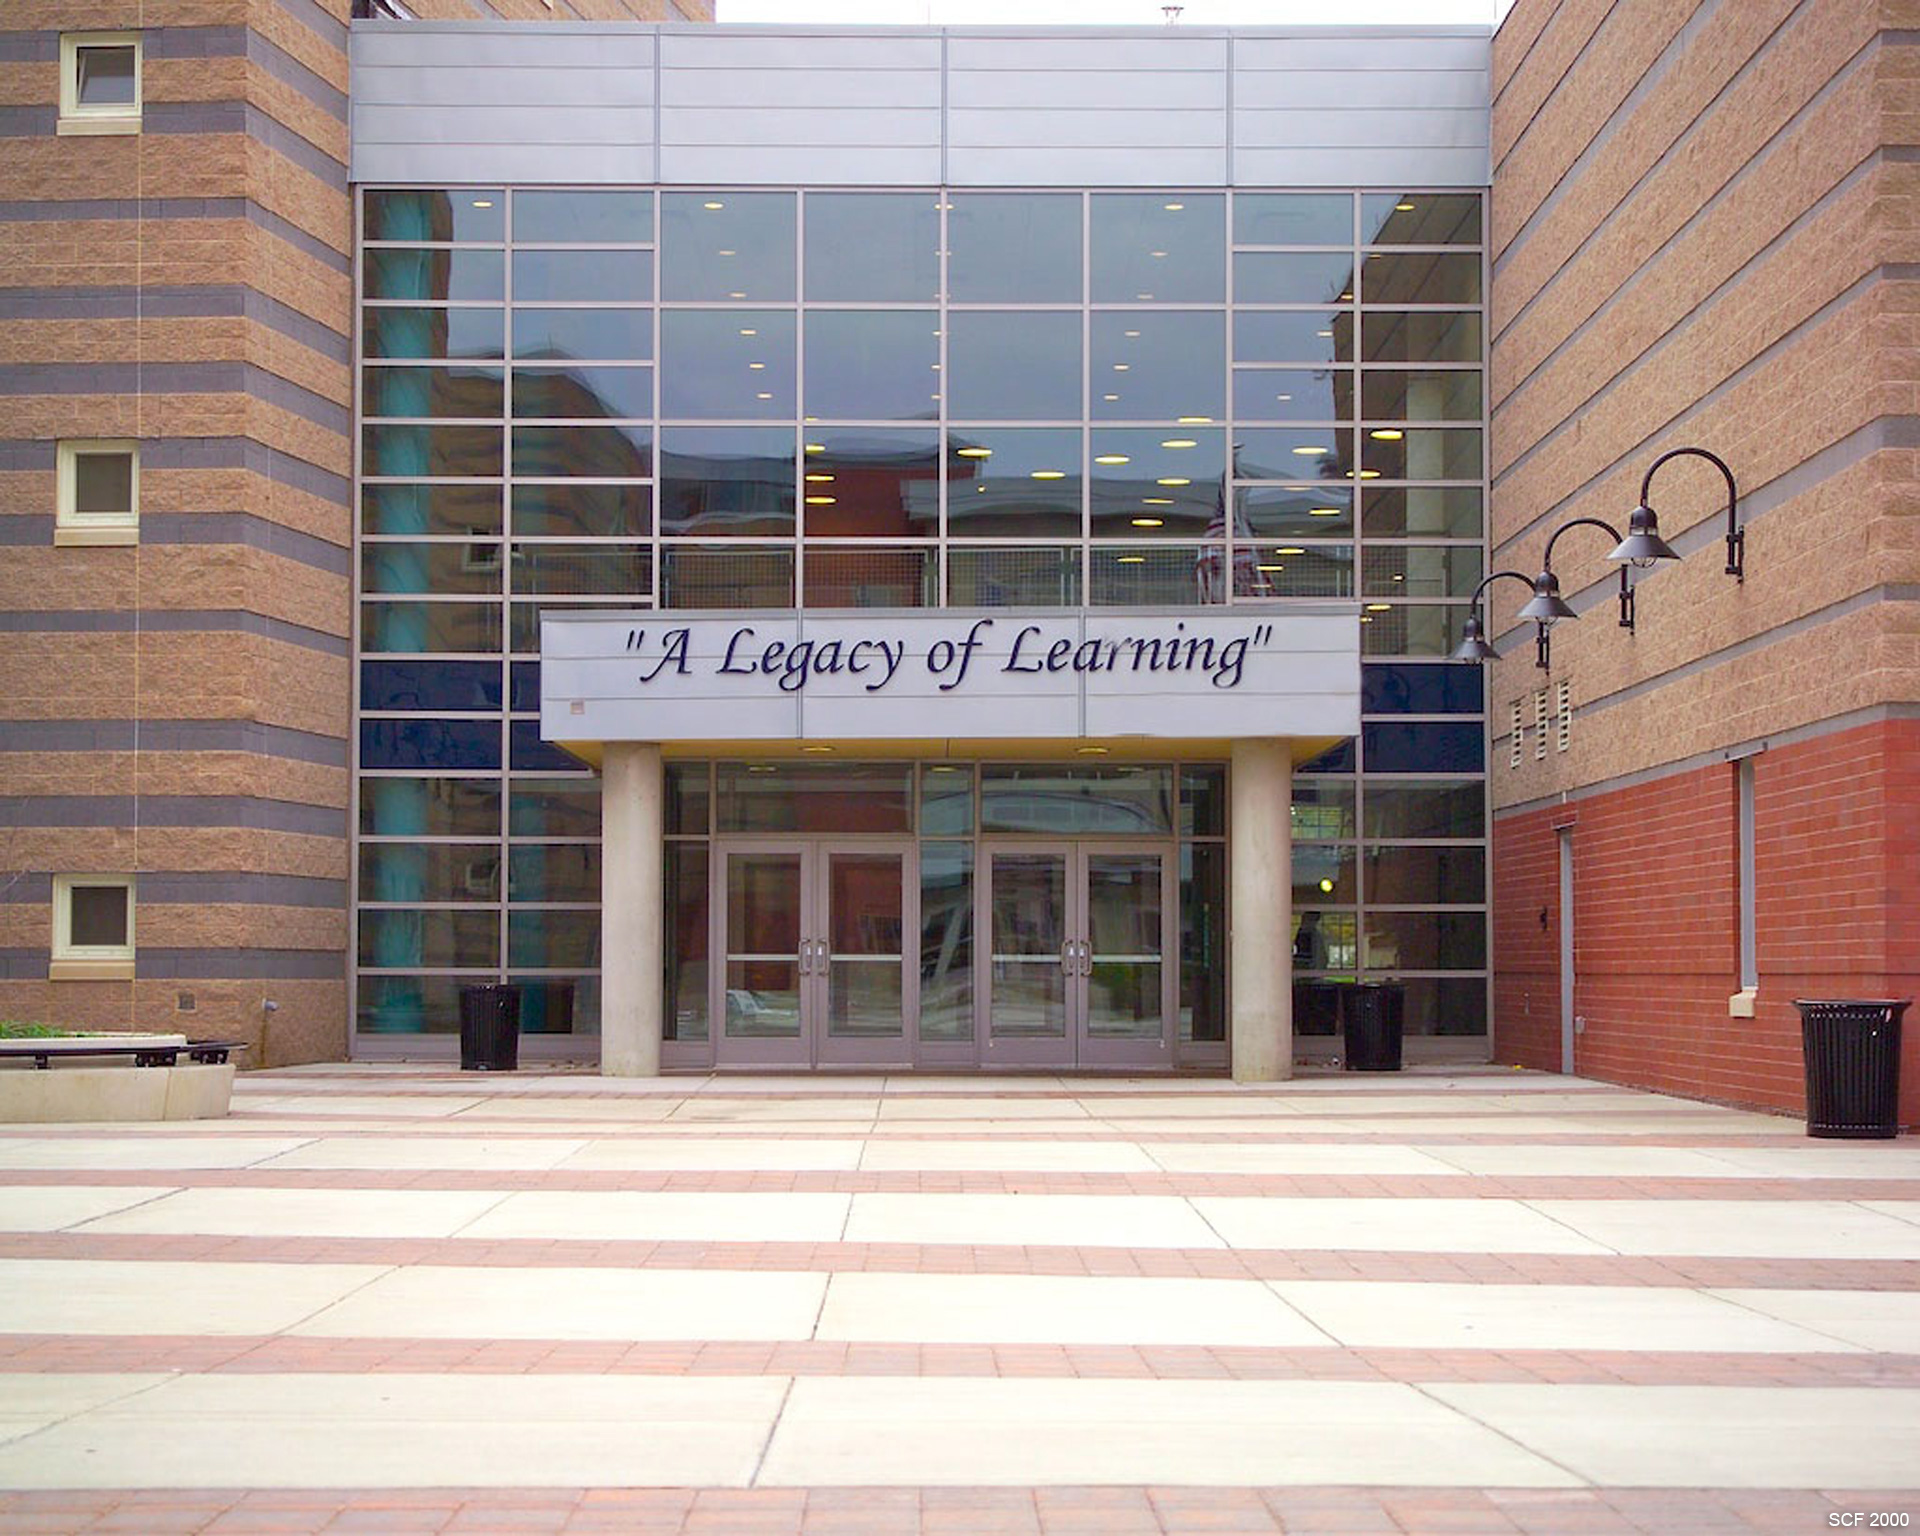 entrance of the Lawrence High School Campus